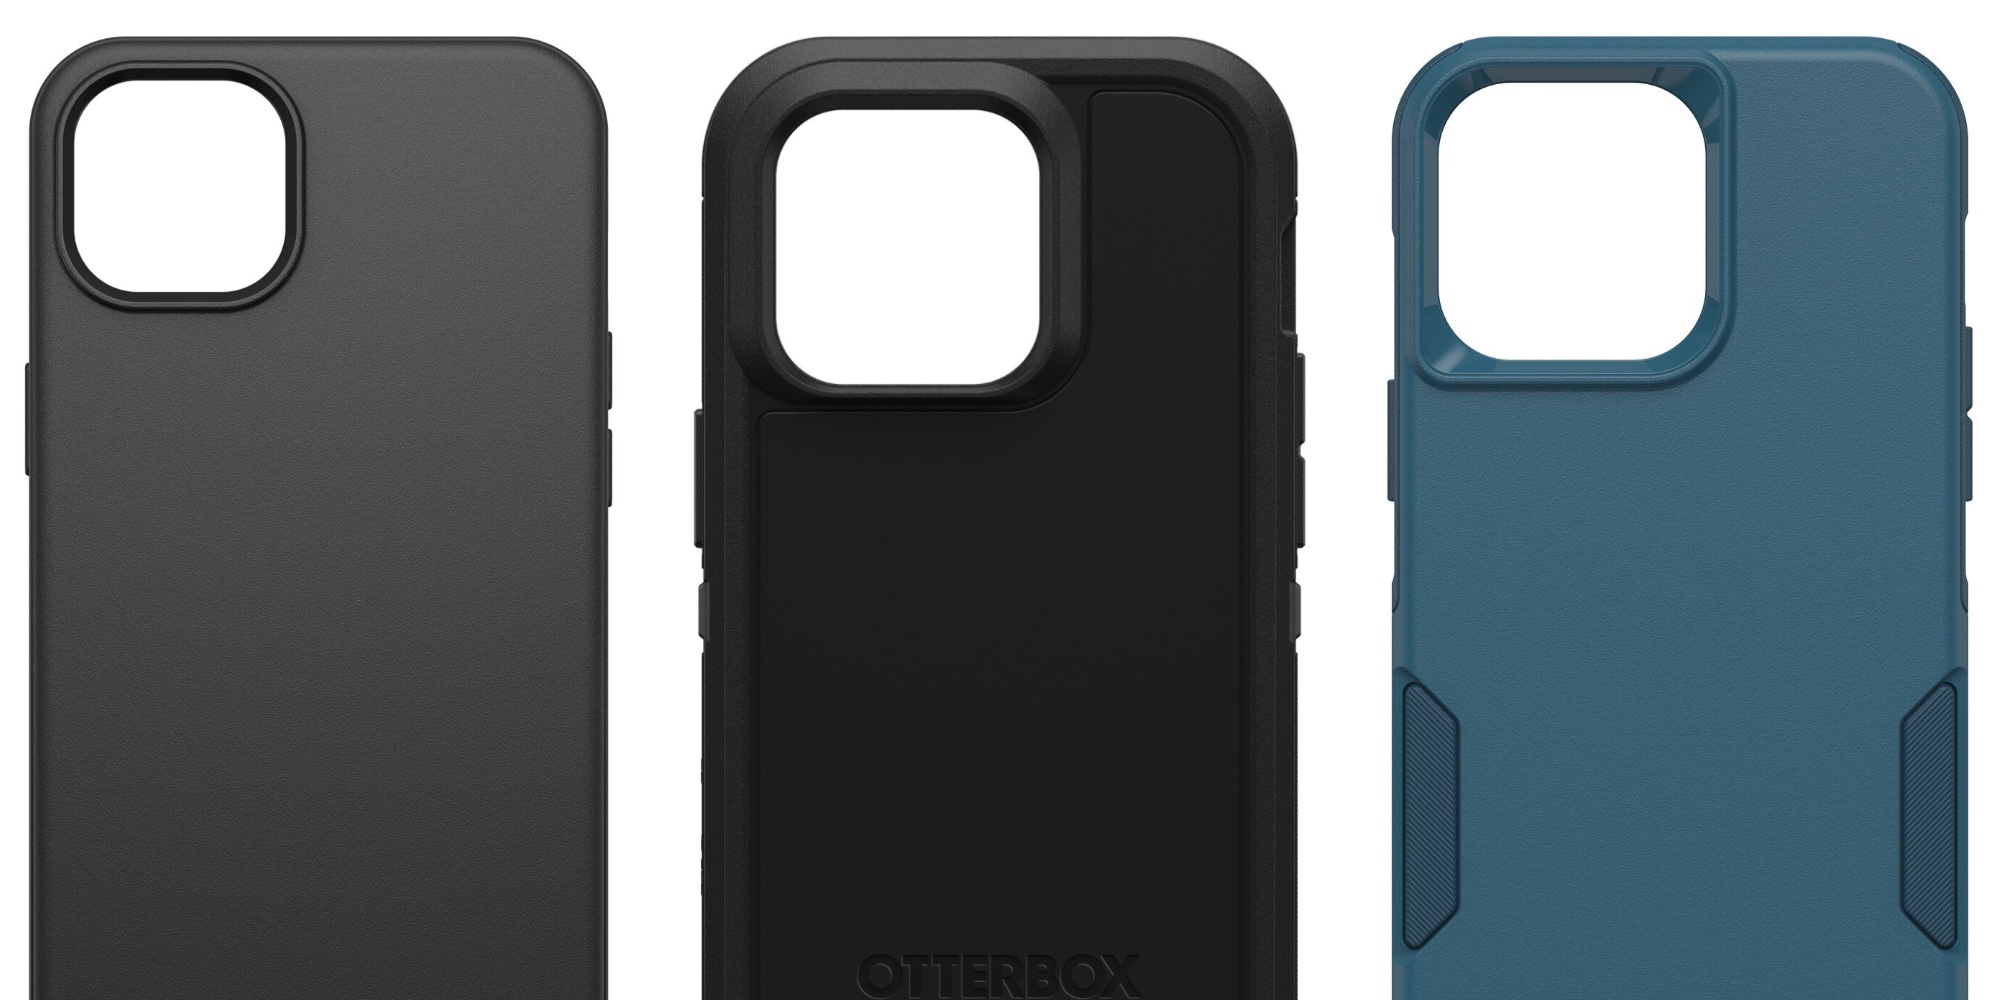 https://9to5toys.com/wp-content/uploads/sites/5/2022/09/OtterBox-iPhone-14-launch.jpg